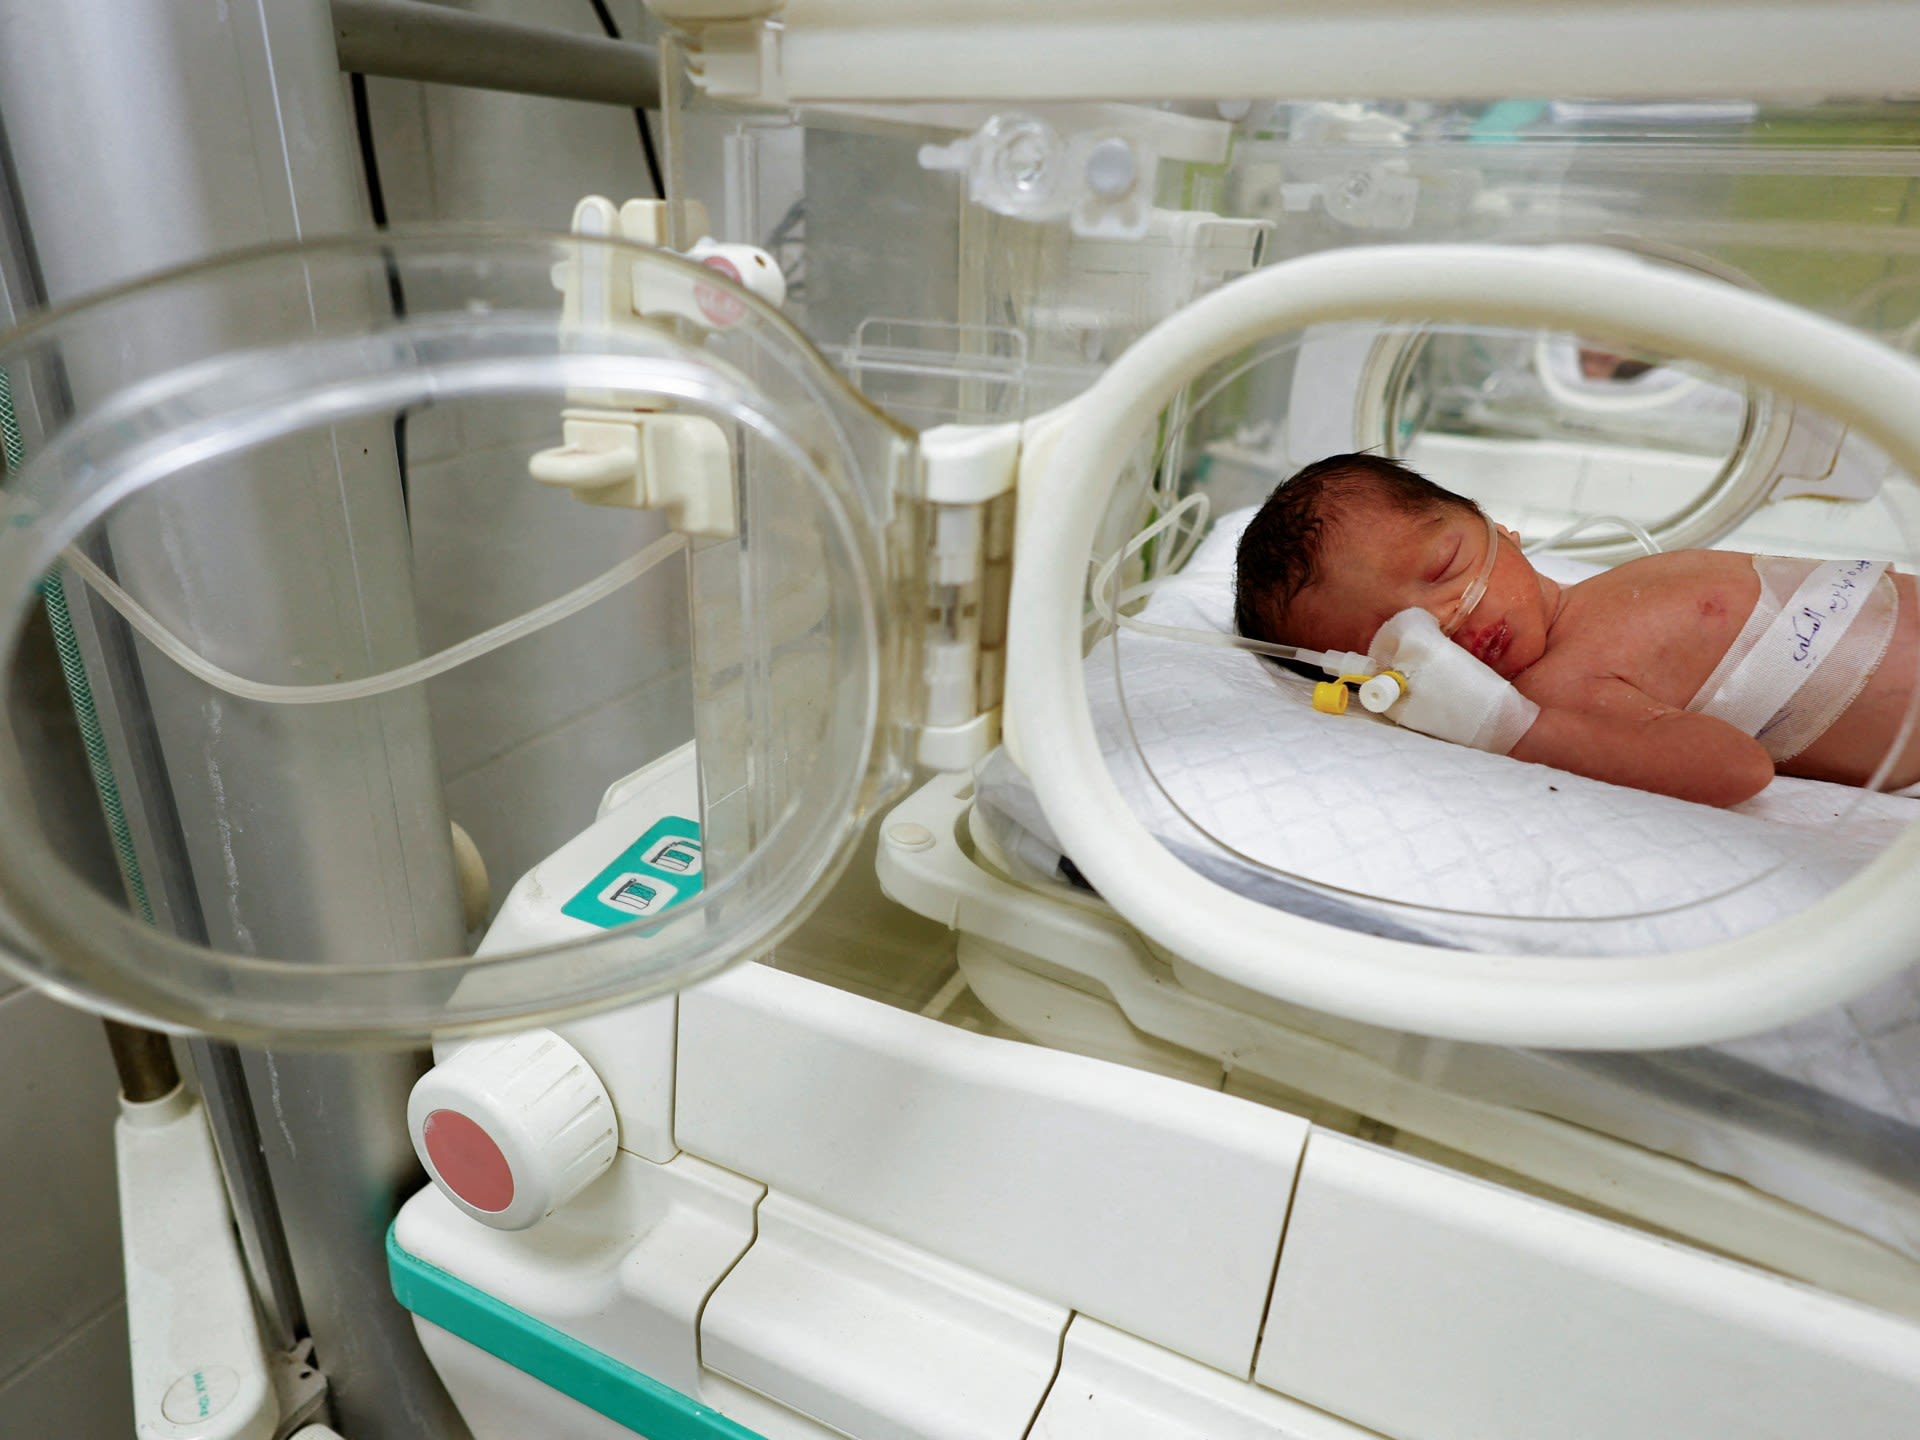 Gaza baby girl saved from dead mother’s womb dies in incubator